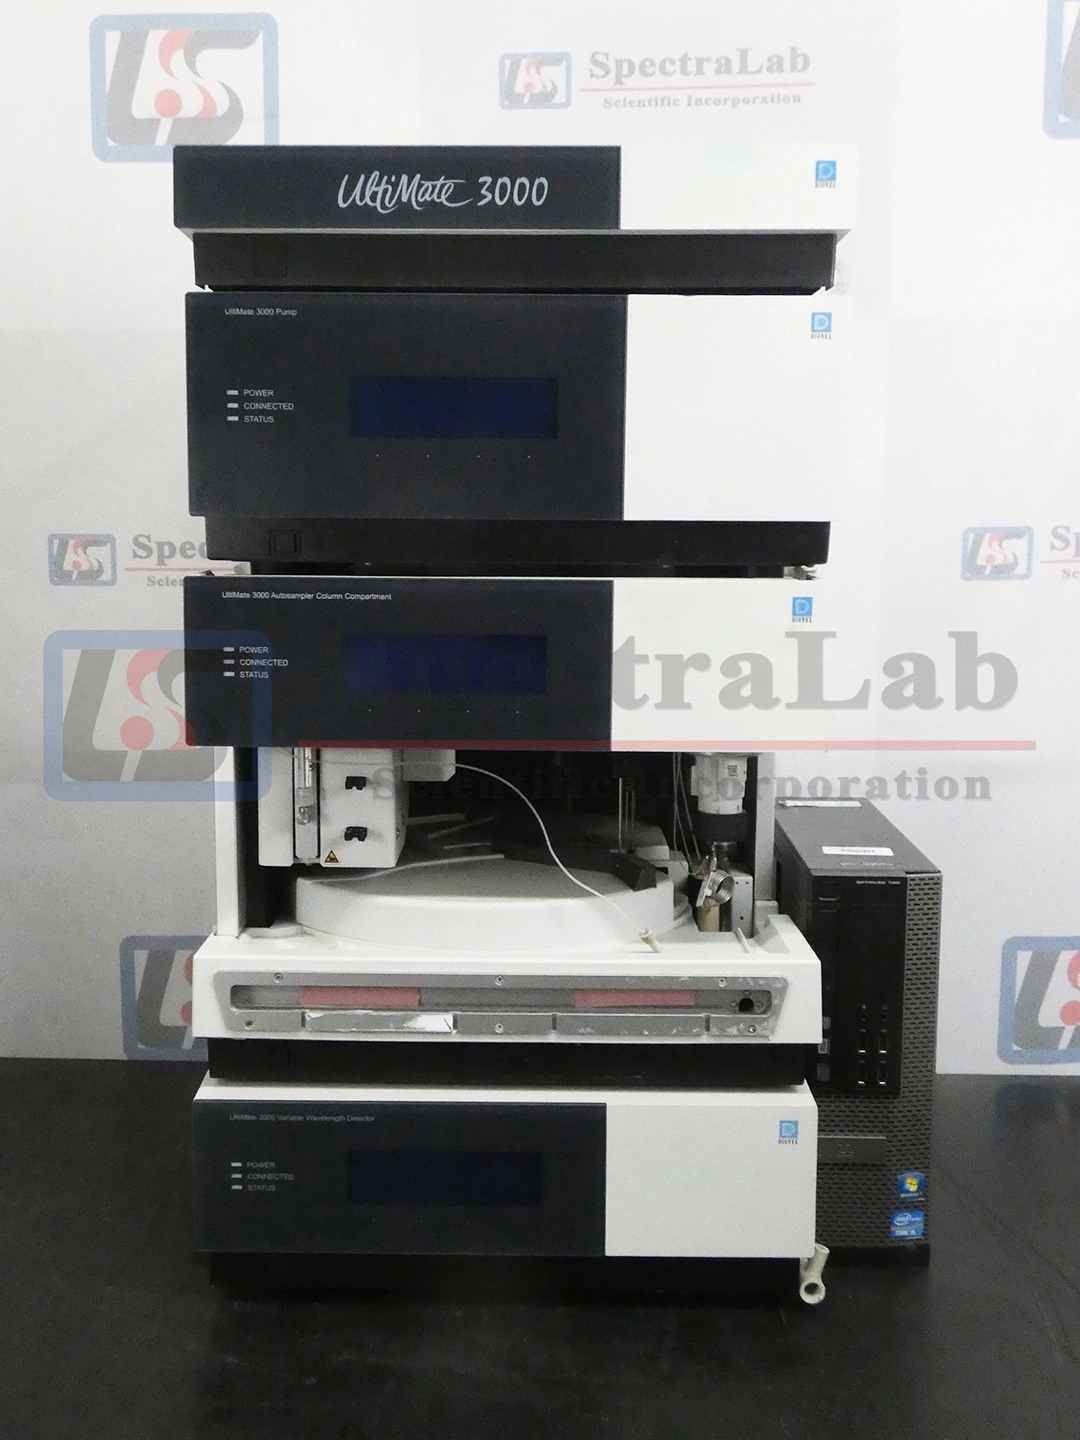 Dionex UltiMate 3000 HPLC System with VWD-3100